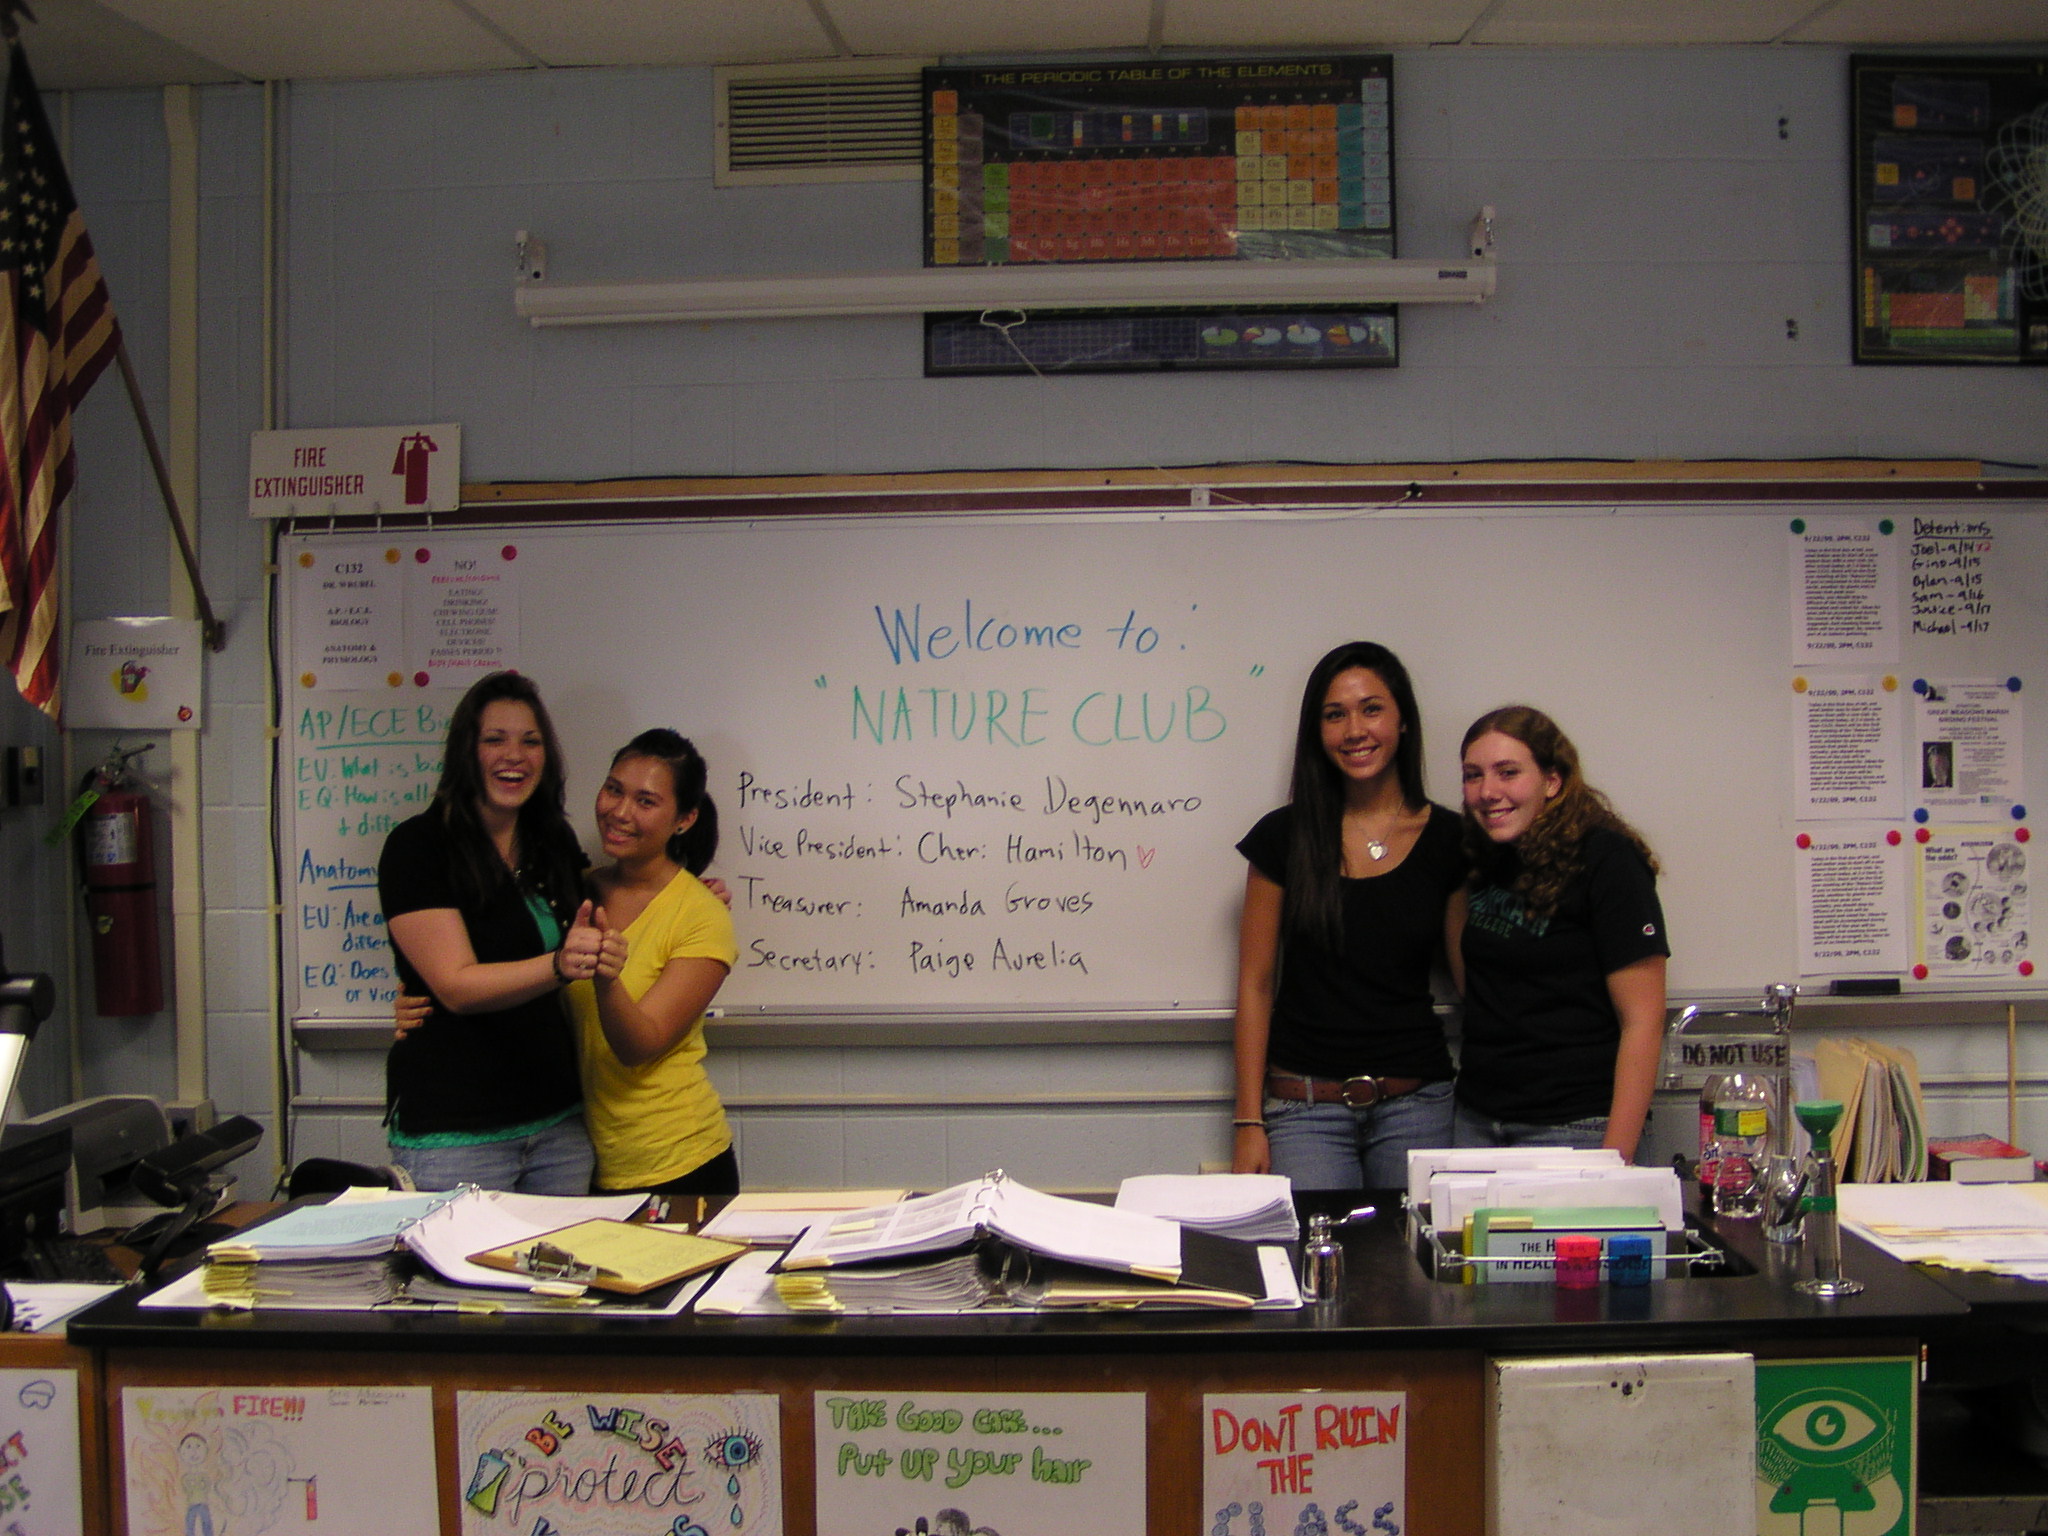 Meet the first ever executive board of the "Nature Club"..